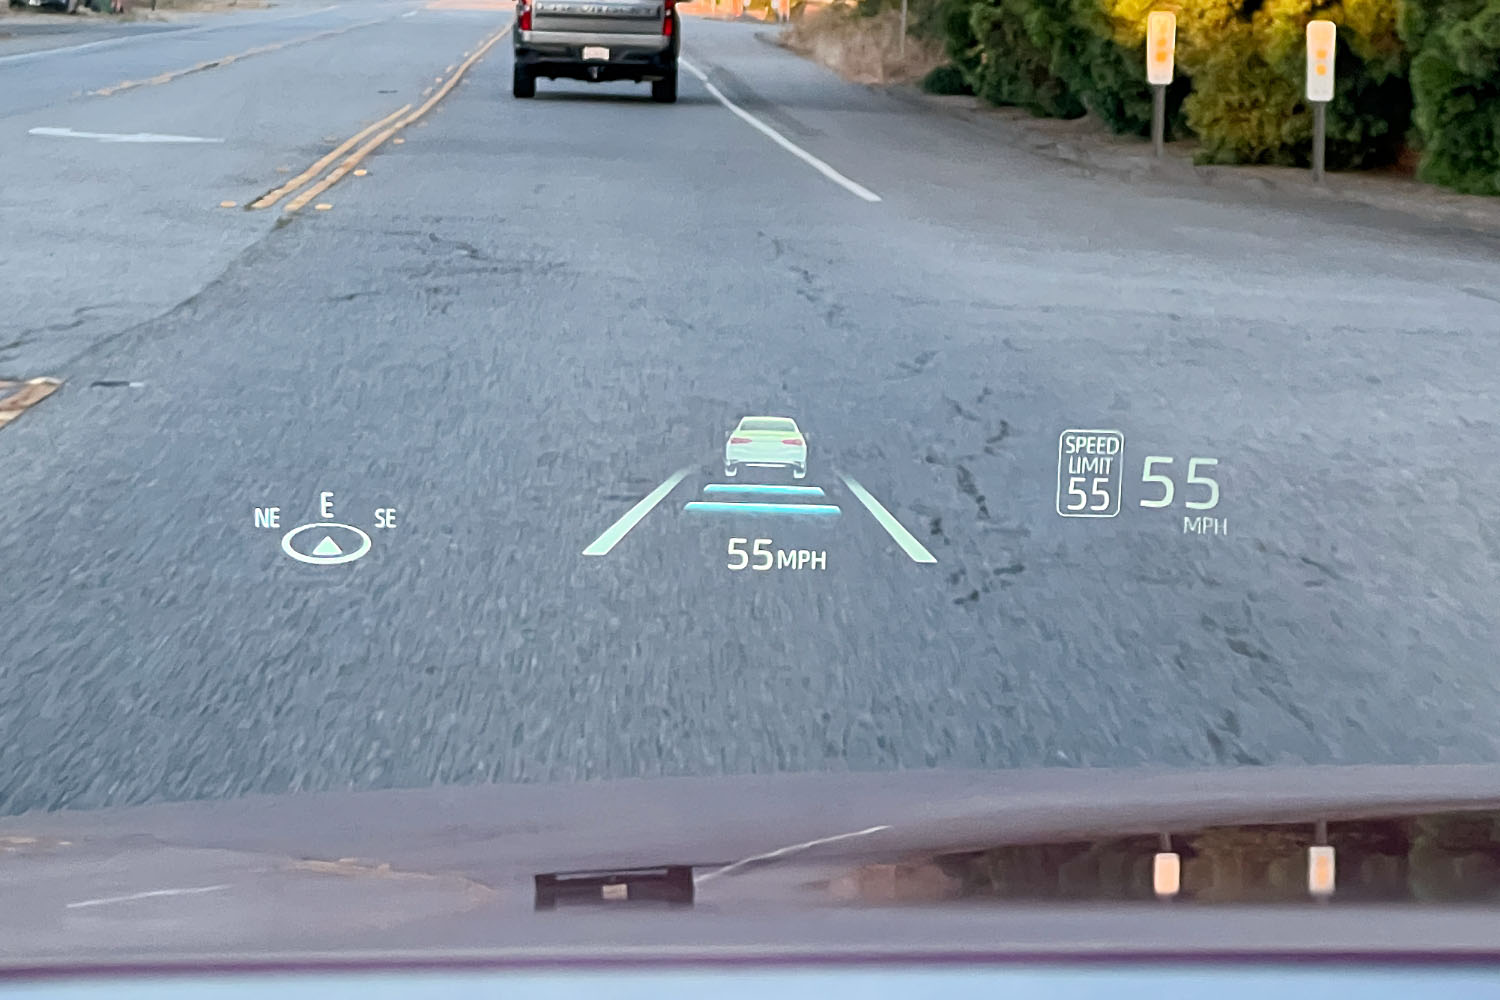 Head-up display in the 2023 Toyota Mirai showing orientation, lane position, and speed